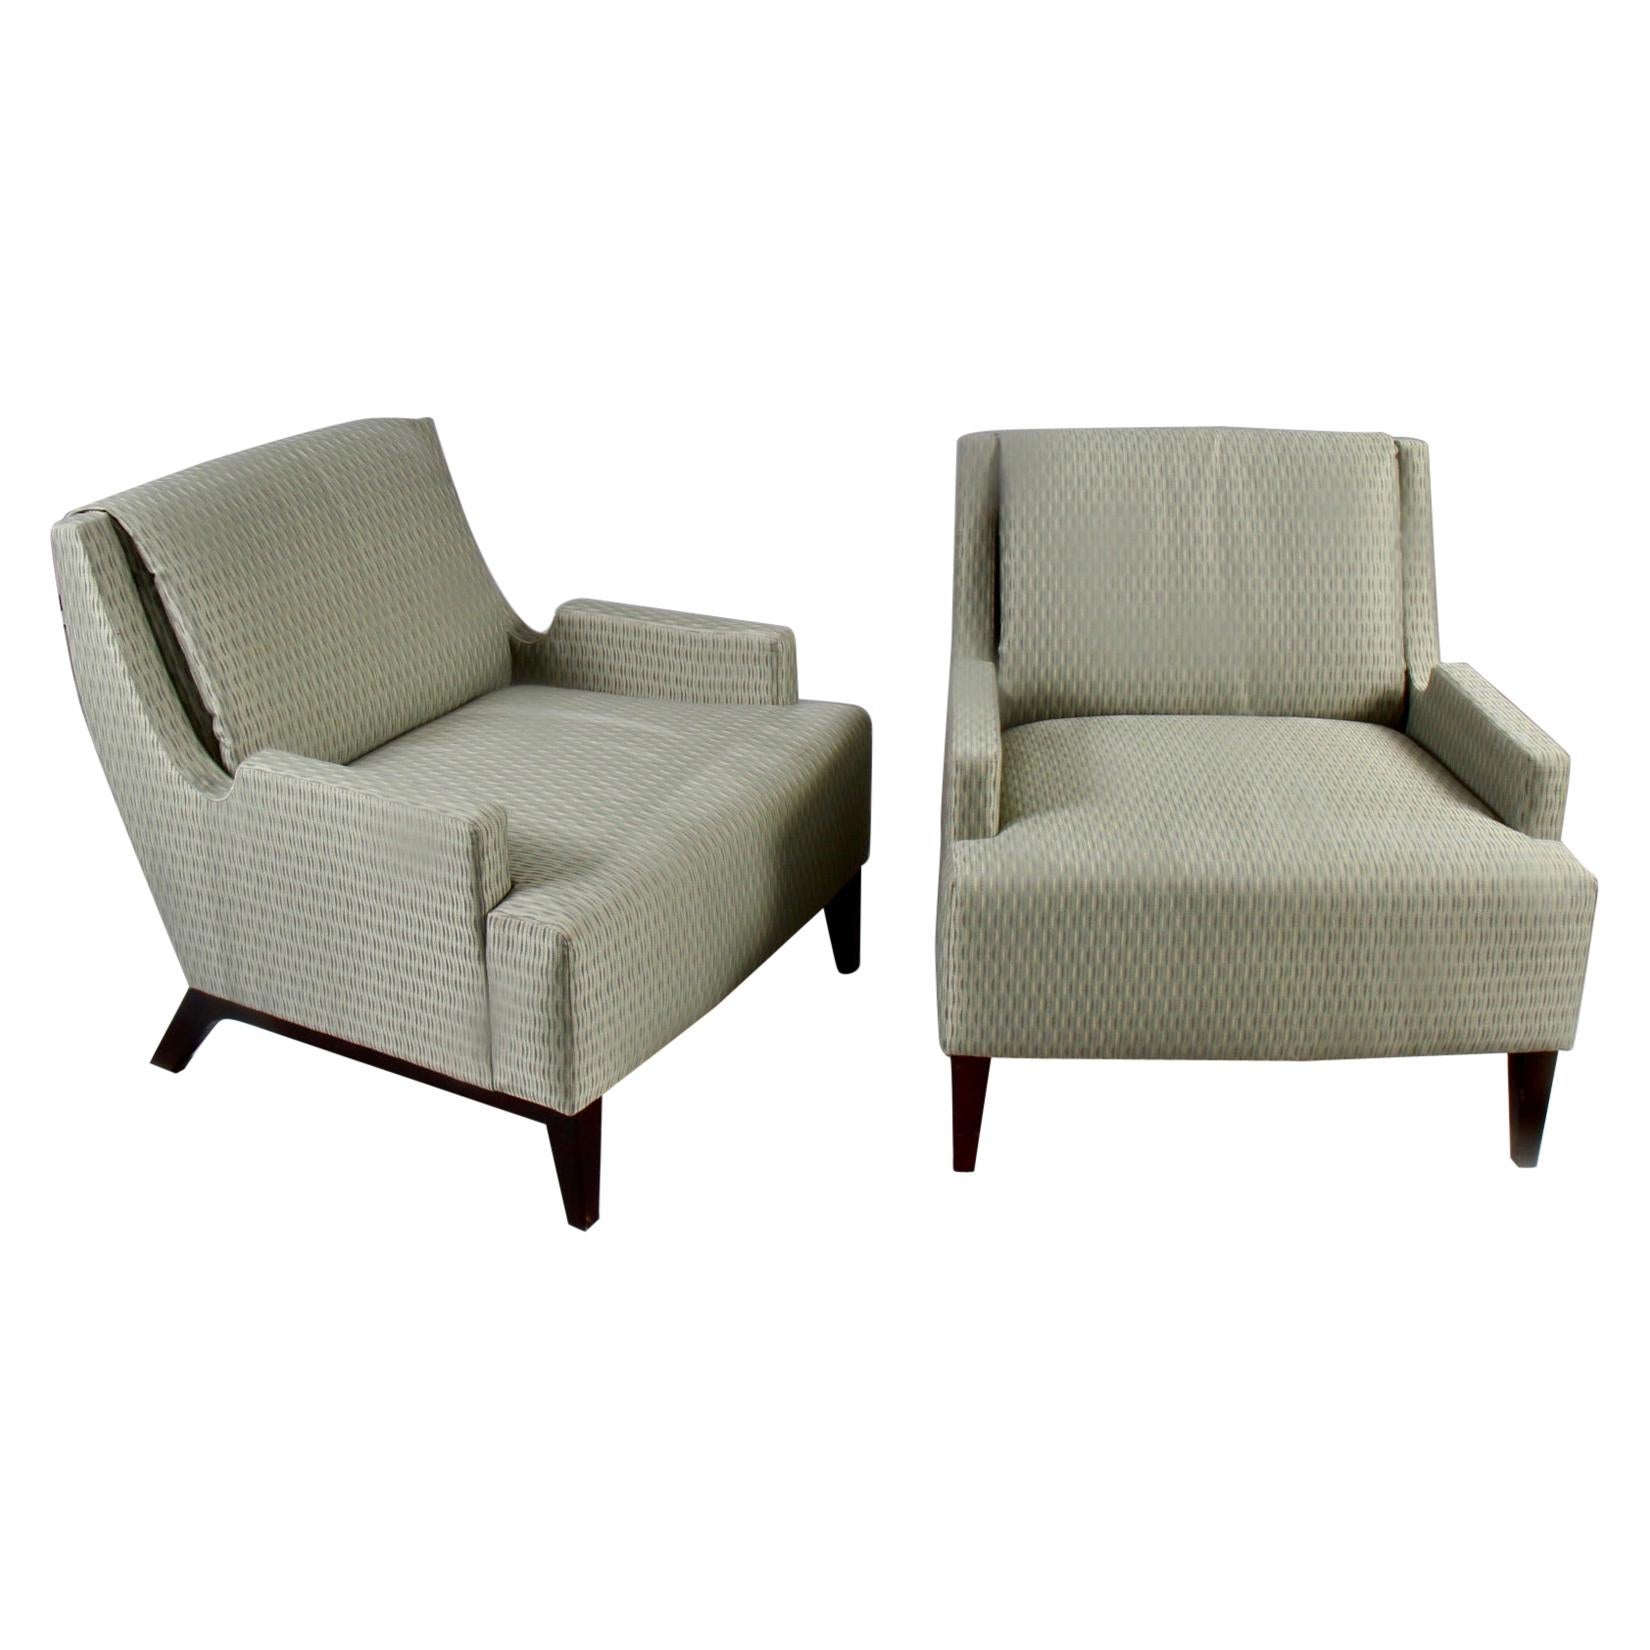 Barbara Barry Perfect Pitch Lounge Chairs for HBF For Sale